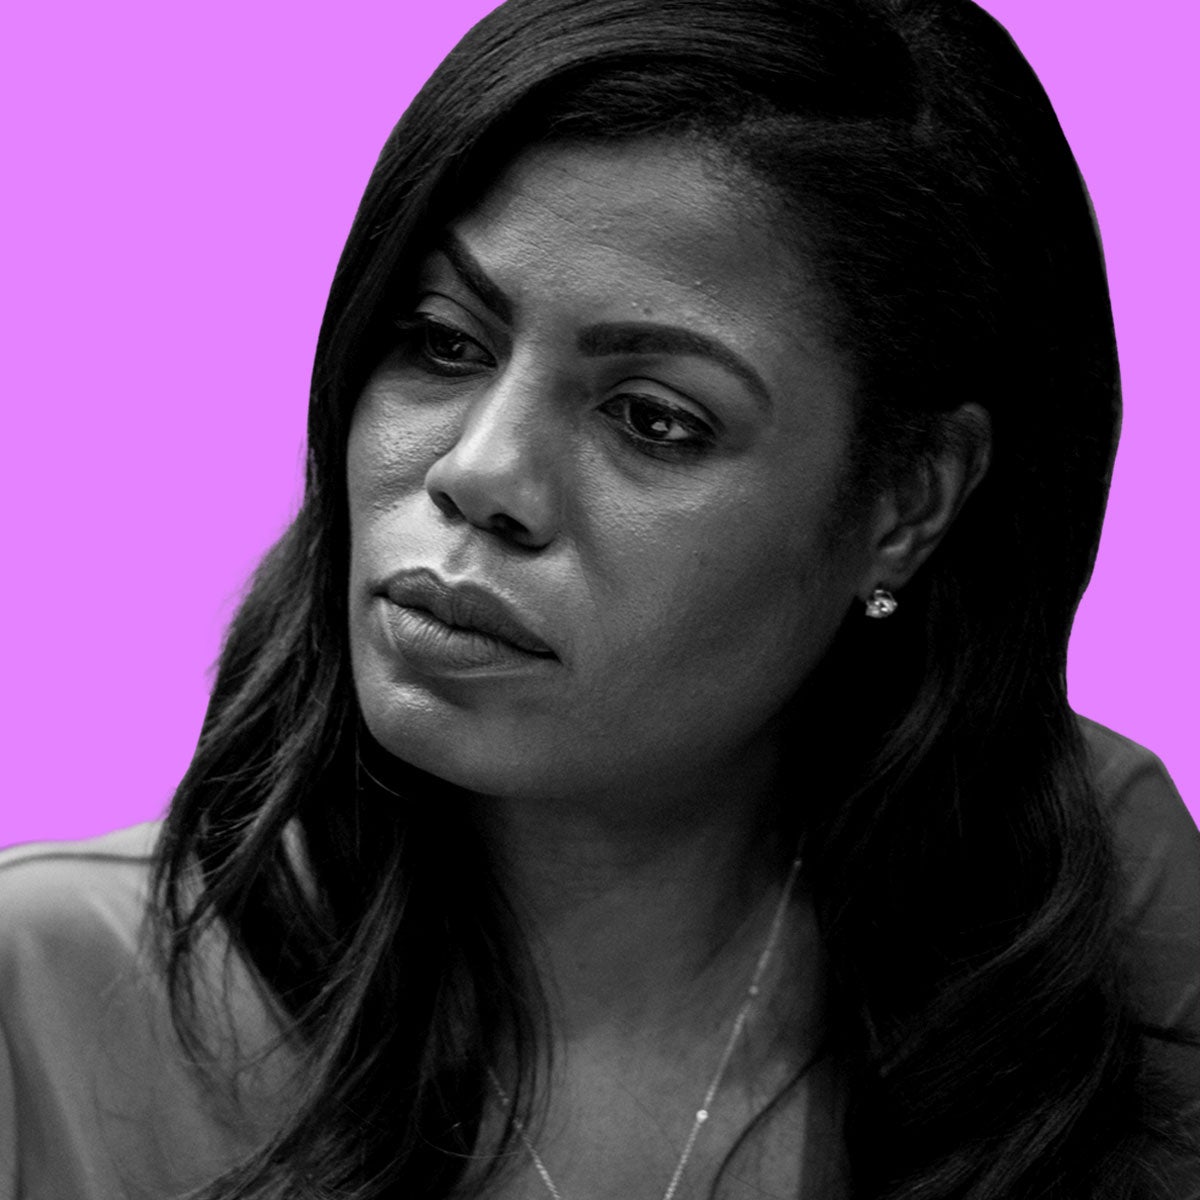 Donald Trump Calls Omarosa A ‘Lowlife’ And ‘Dog’ After She Claimed He Used The N-Word